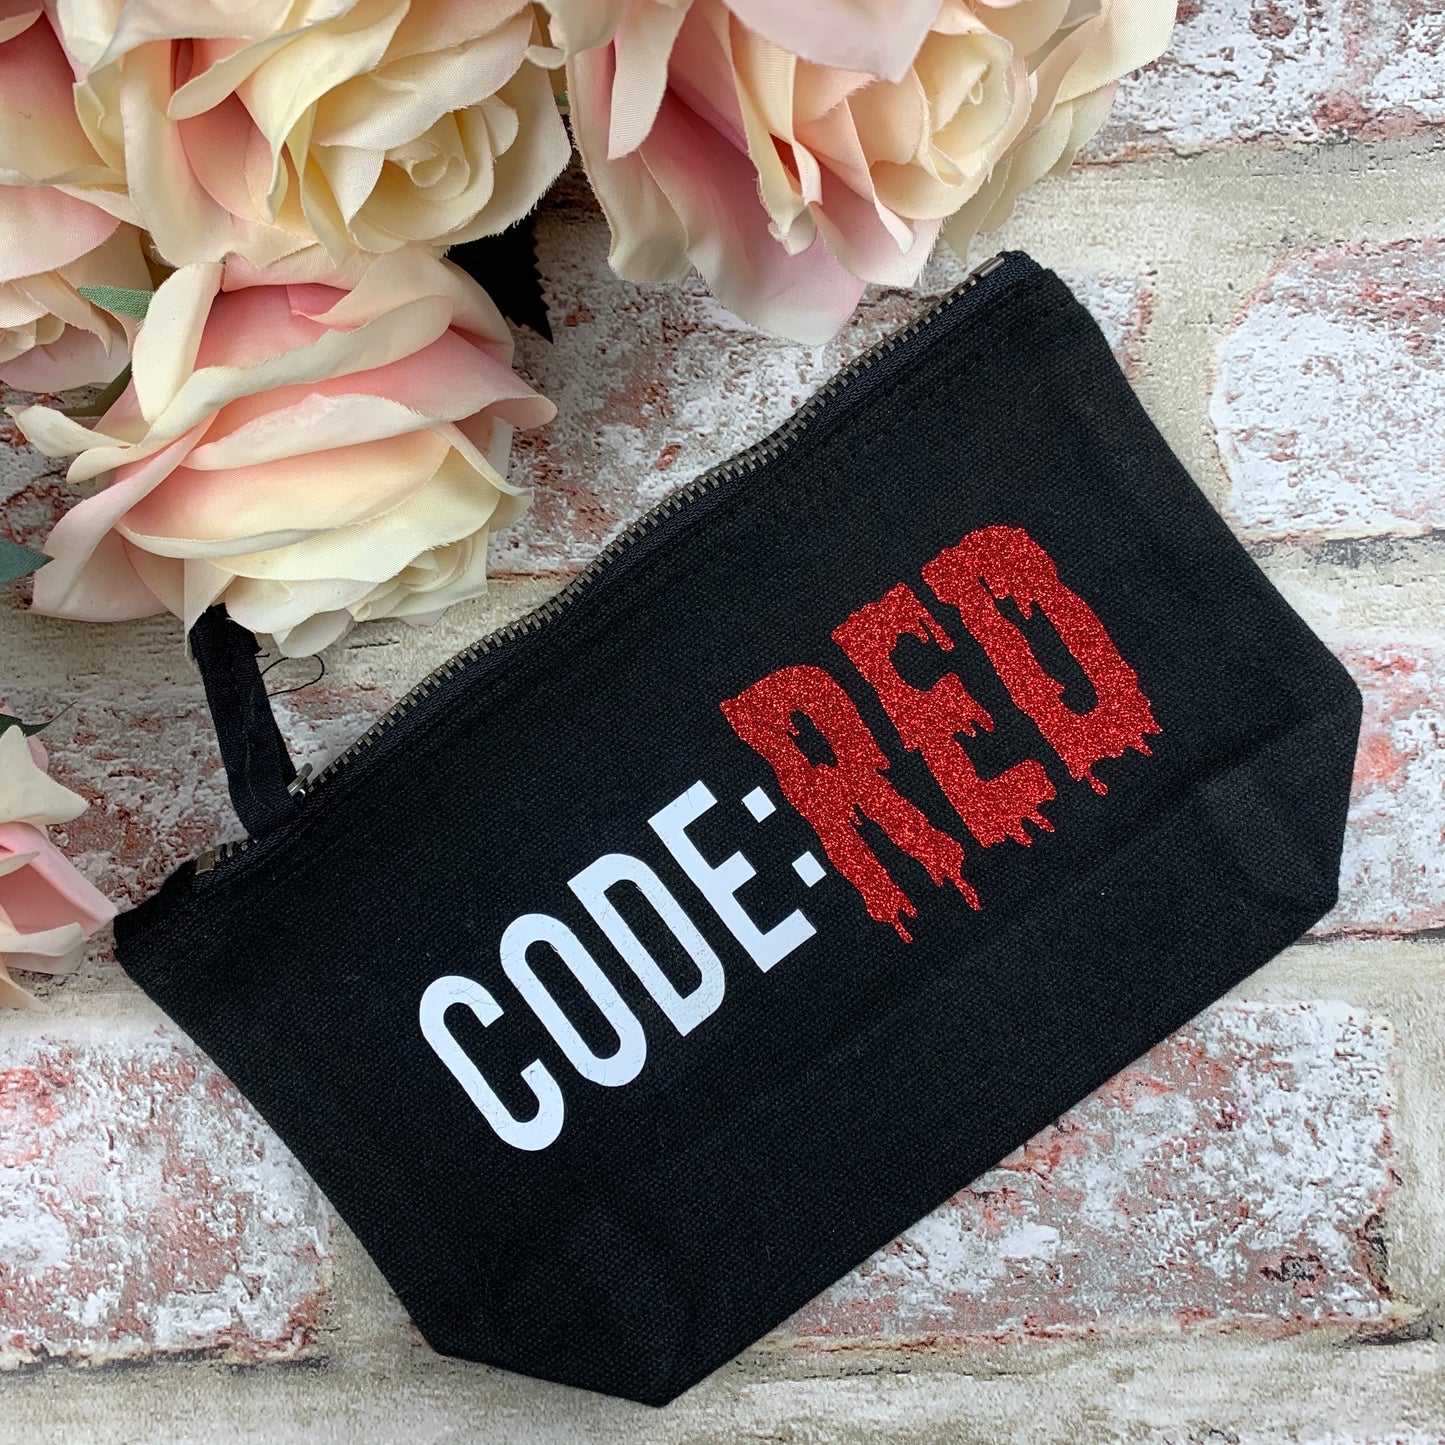 Code: Red - Tampon, pad, sanitary bag / Period Pouch